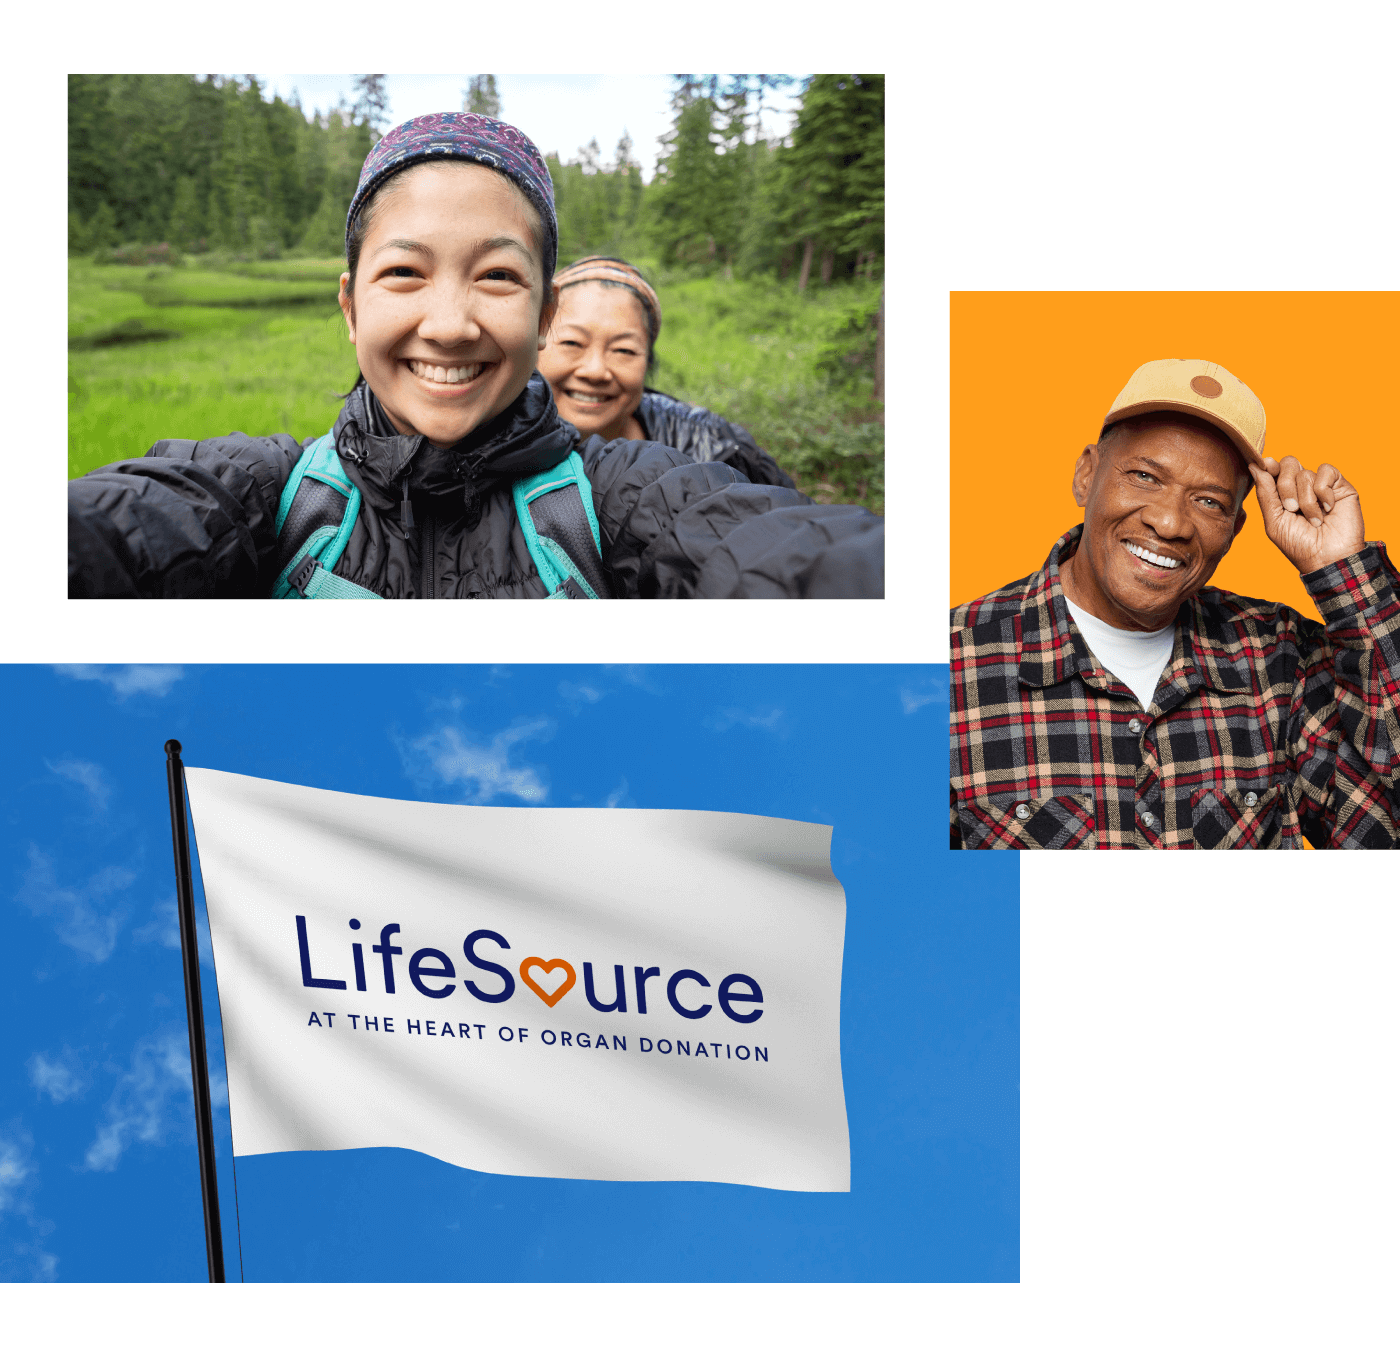 images of mother and daughter taking selfie while hiking, man smiling at camera as he tips his hat, LifeSource flag blowing in the wind.